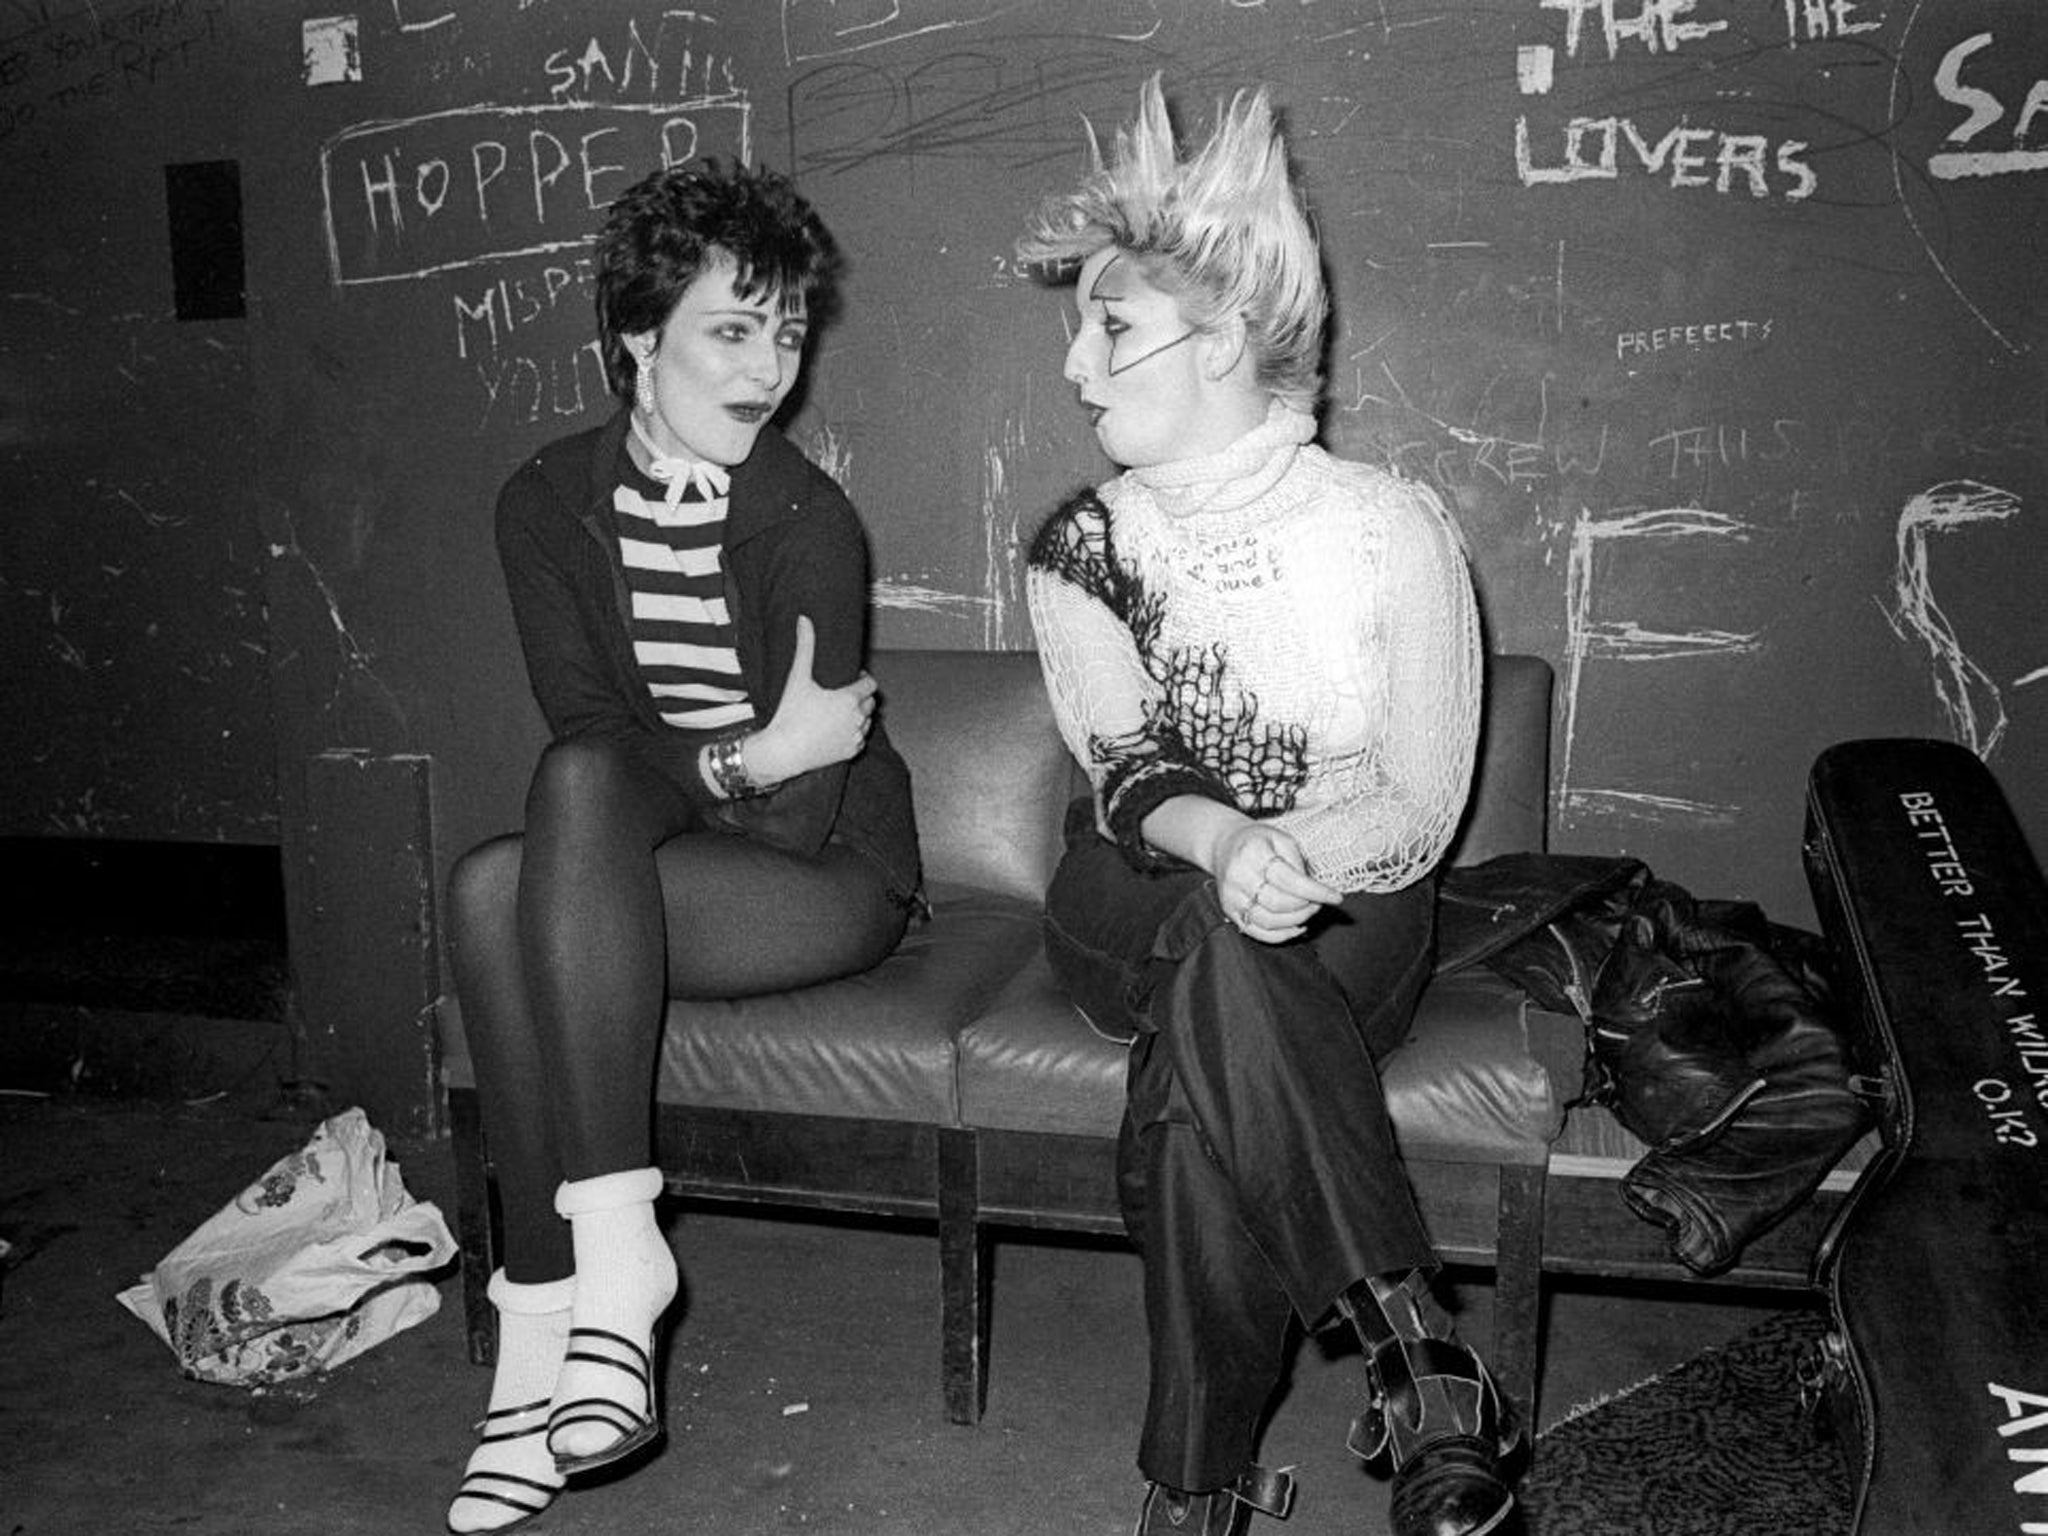 Nice one: Siouxsie Sioux and Jordan at Eric’s in Liverpool in 1978